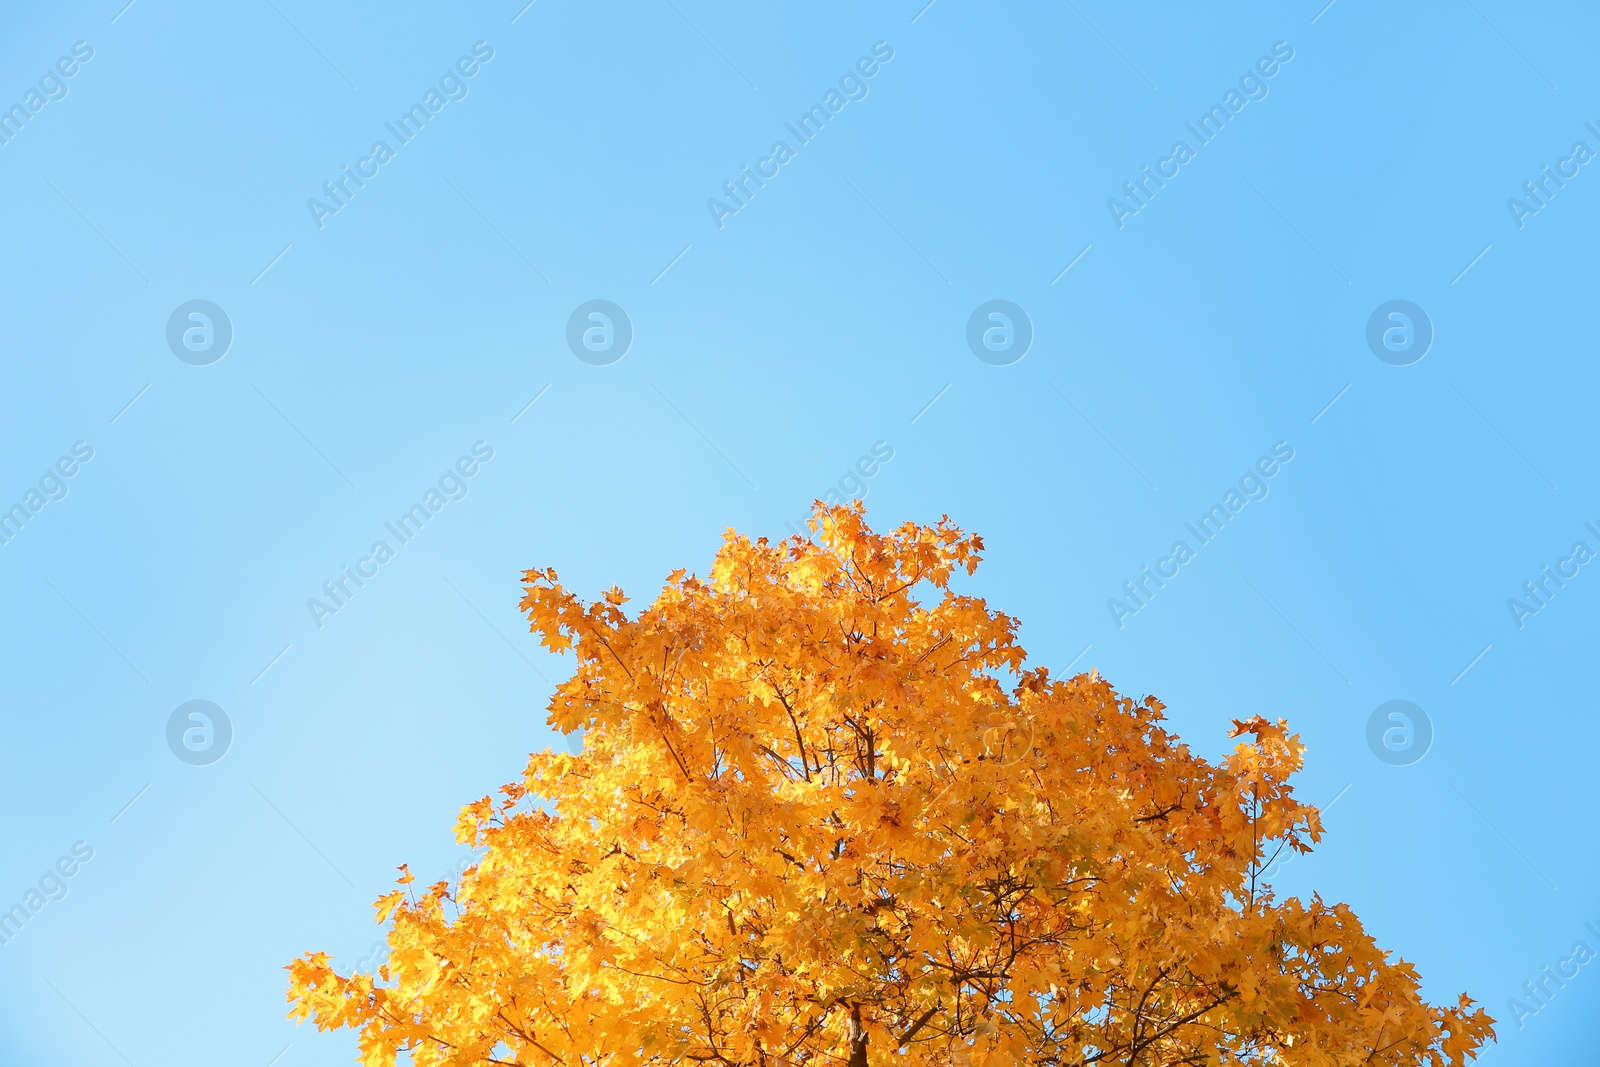 Photo of Tree with autumn leaves against blue sky on sunny day